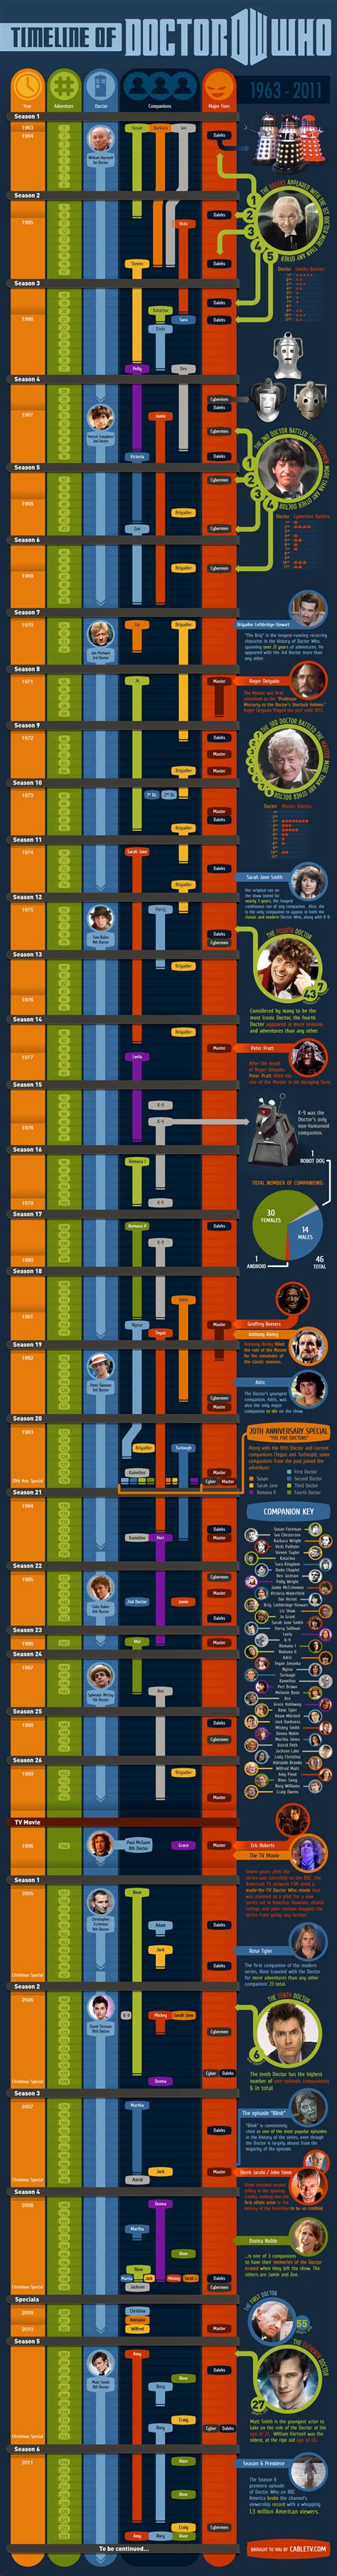 Doctor Who Timeline 1963 2011 Infographic Doctor Who Timeline